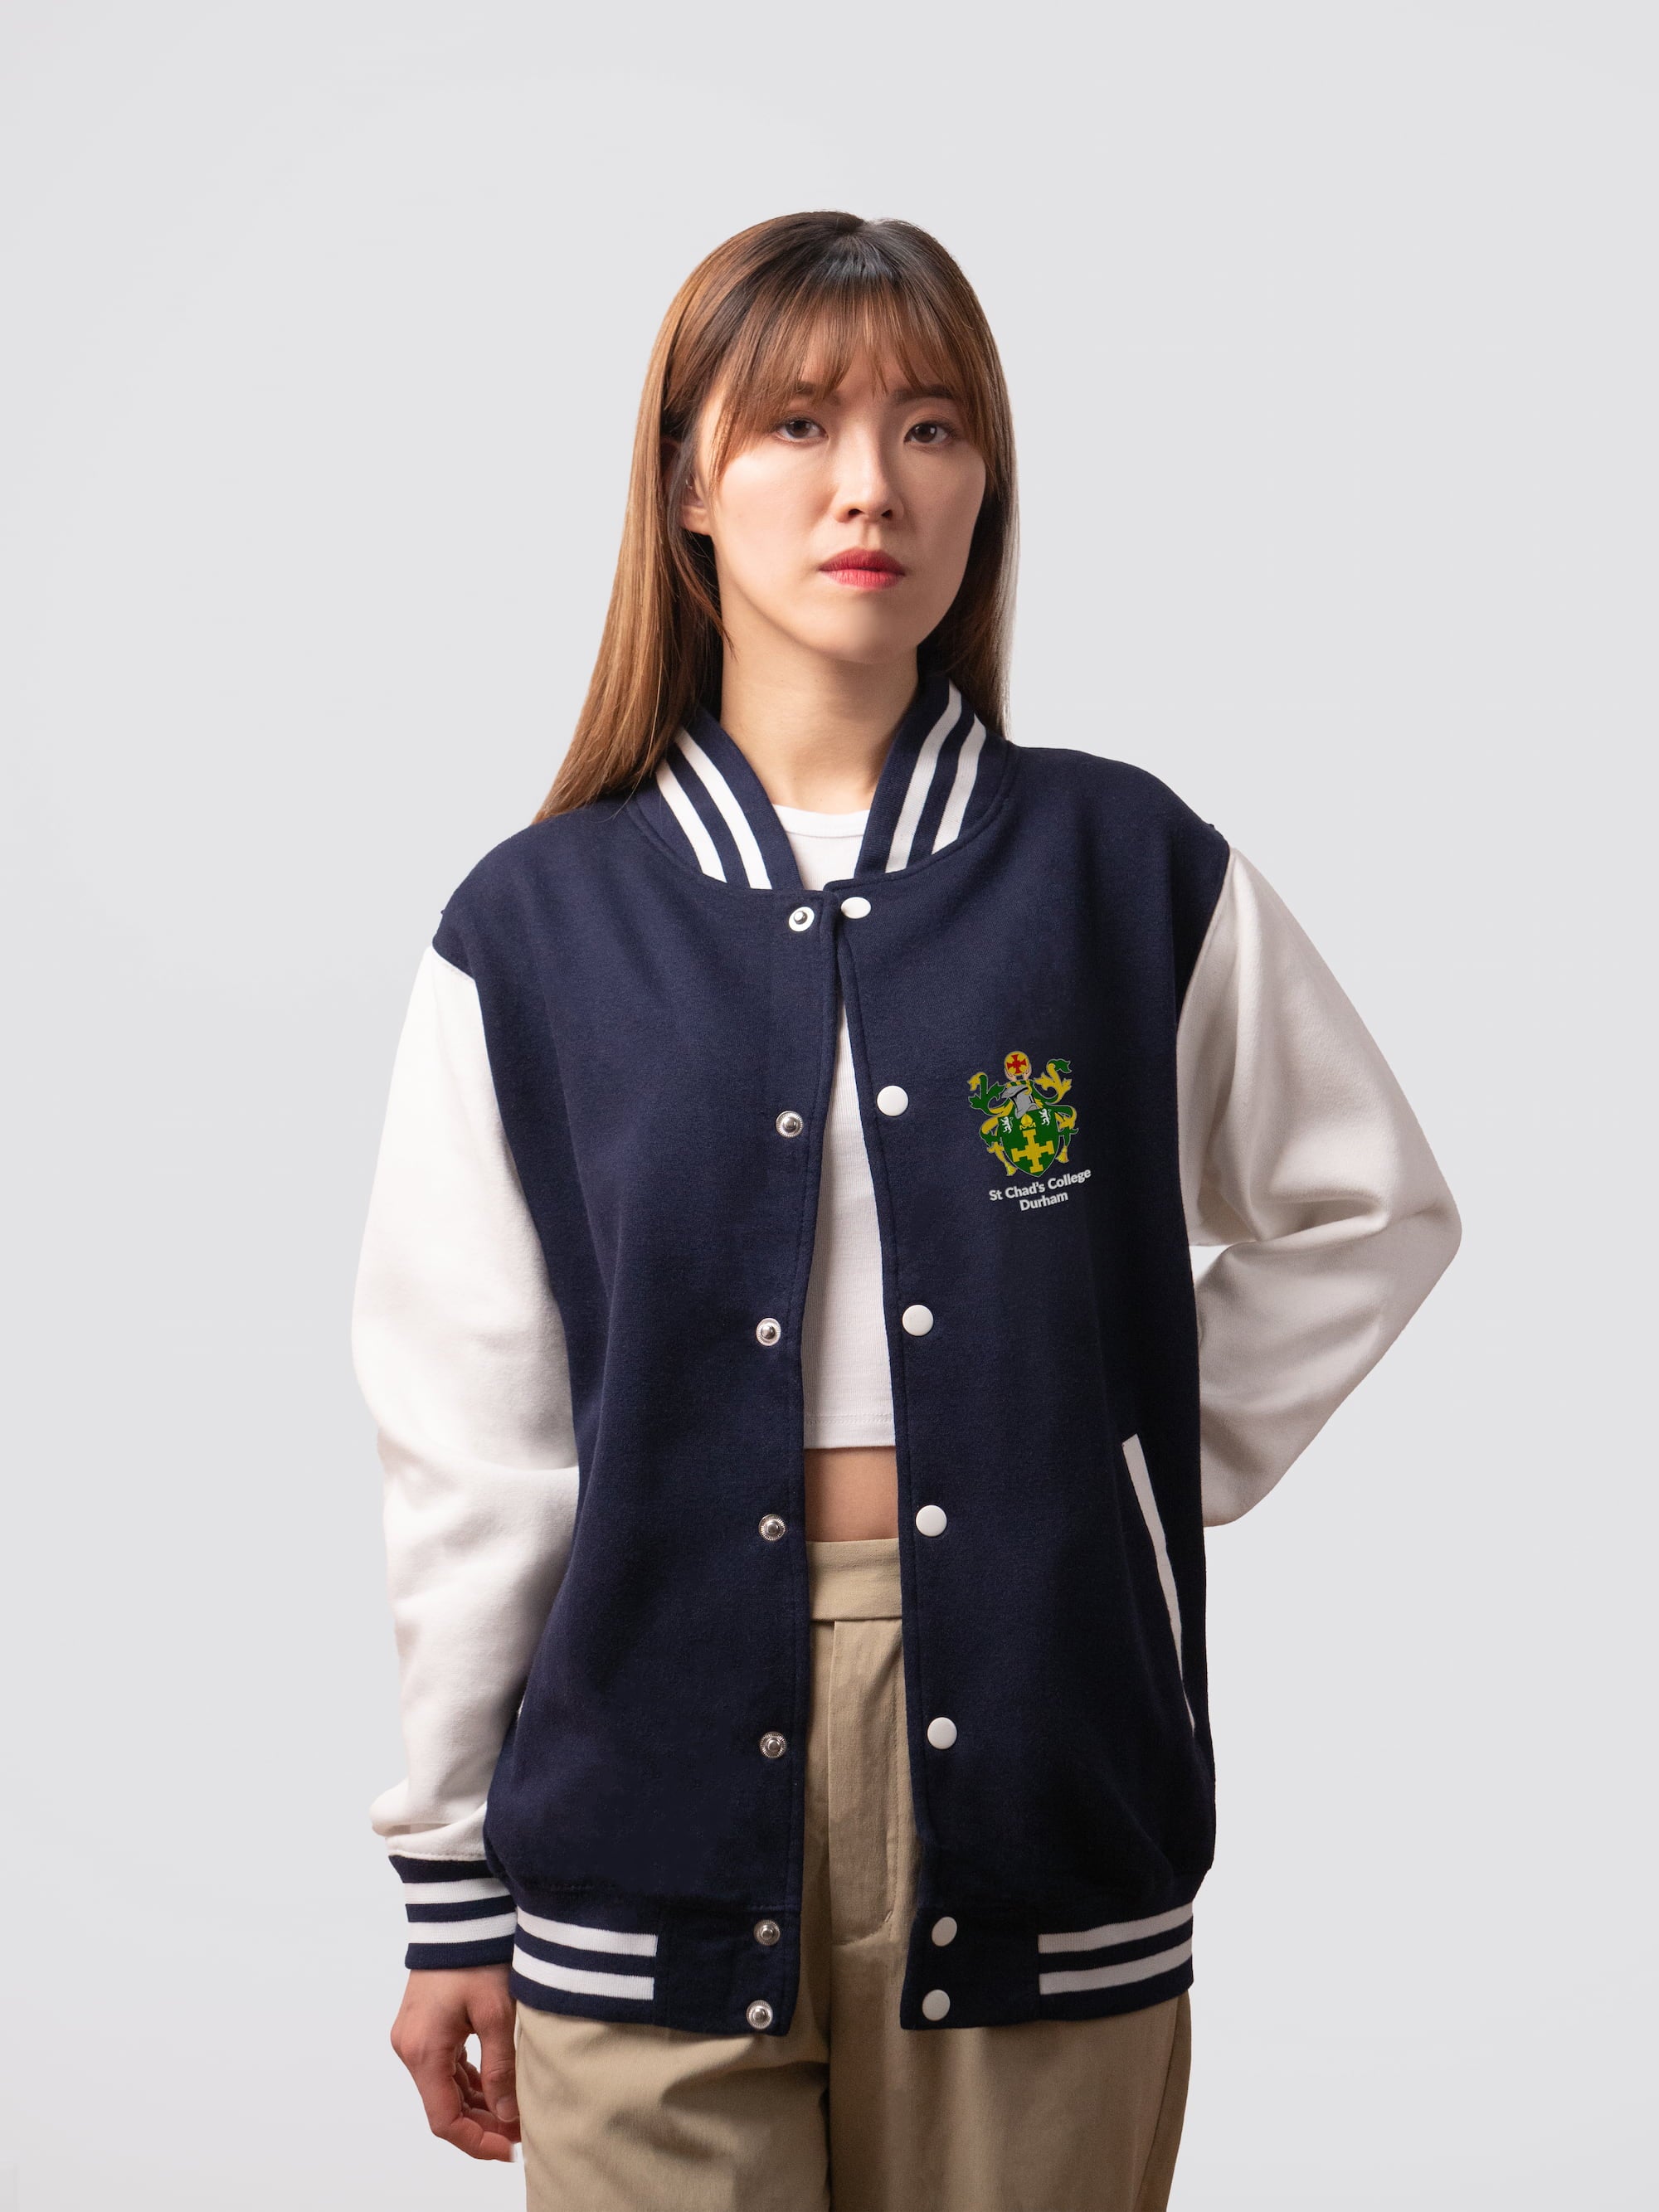 Retro style varsity jacket, with embroidered St Chad's crest